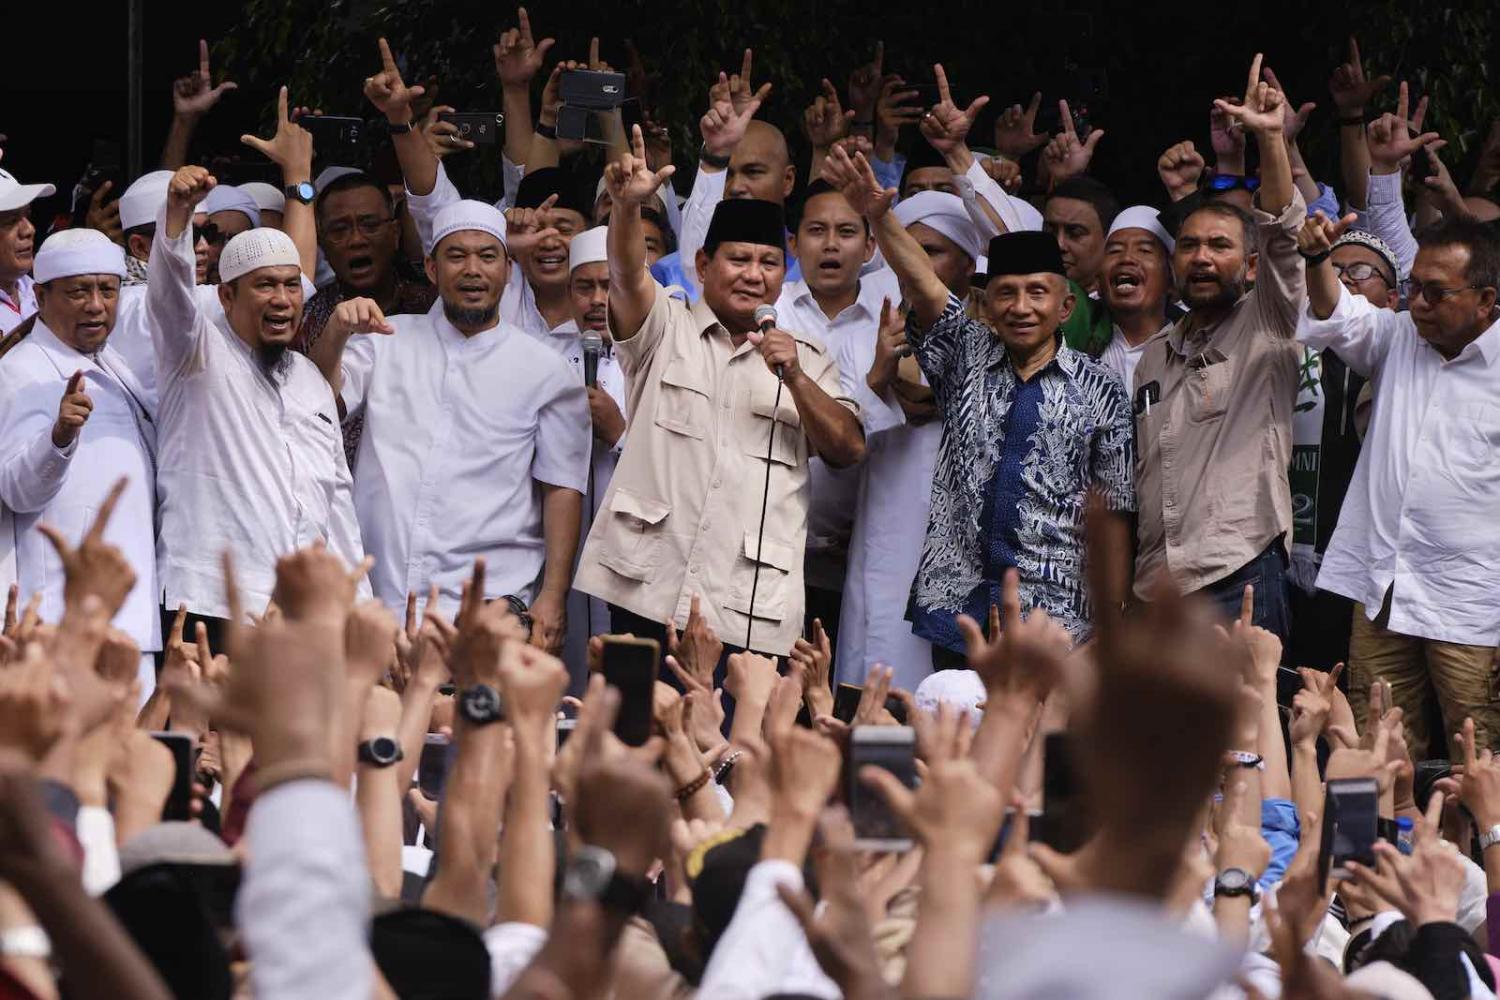 Presidential candidate Prabowo Subianto (centre) speaks to supporters in Jakarta after the general election in April 2019, which he eventually lost to incumbent Joko Widodo (Photo: Ed Wray/Getty Images)